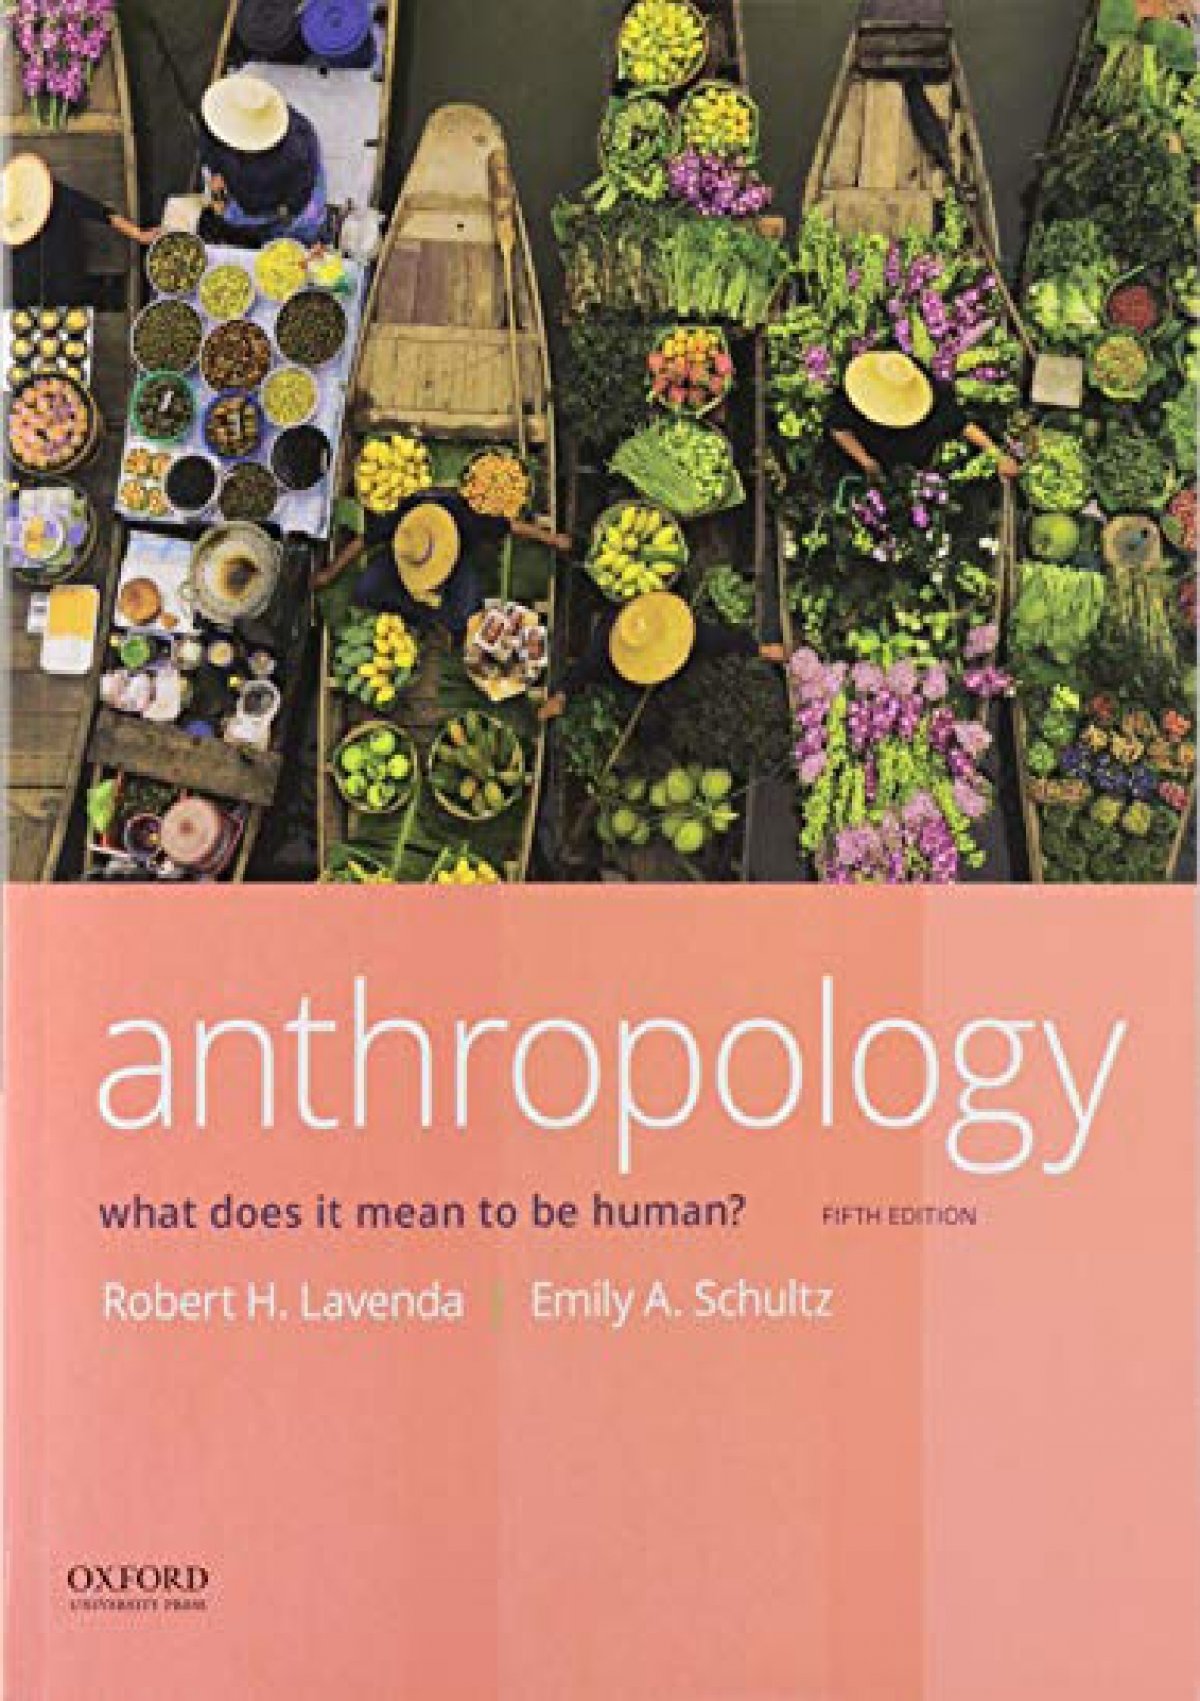 Download Book [PDF] Anthropology: What Does it Mean to Be Human?